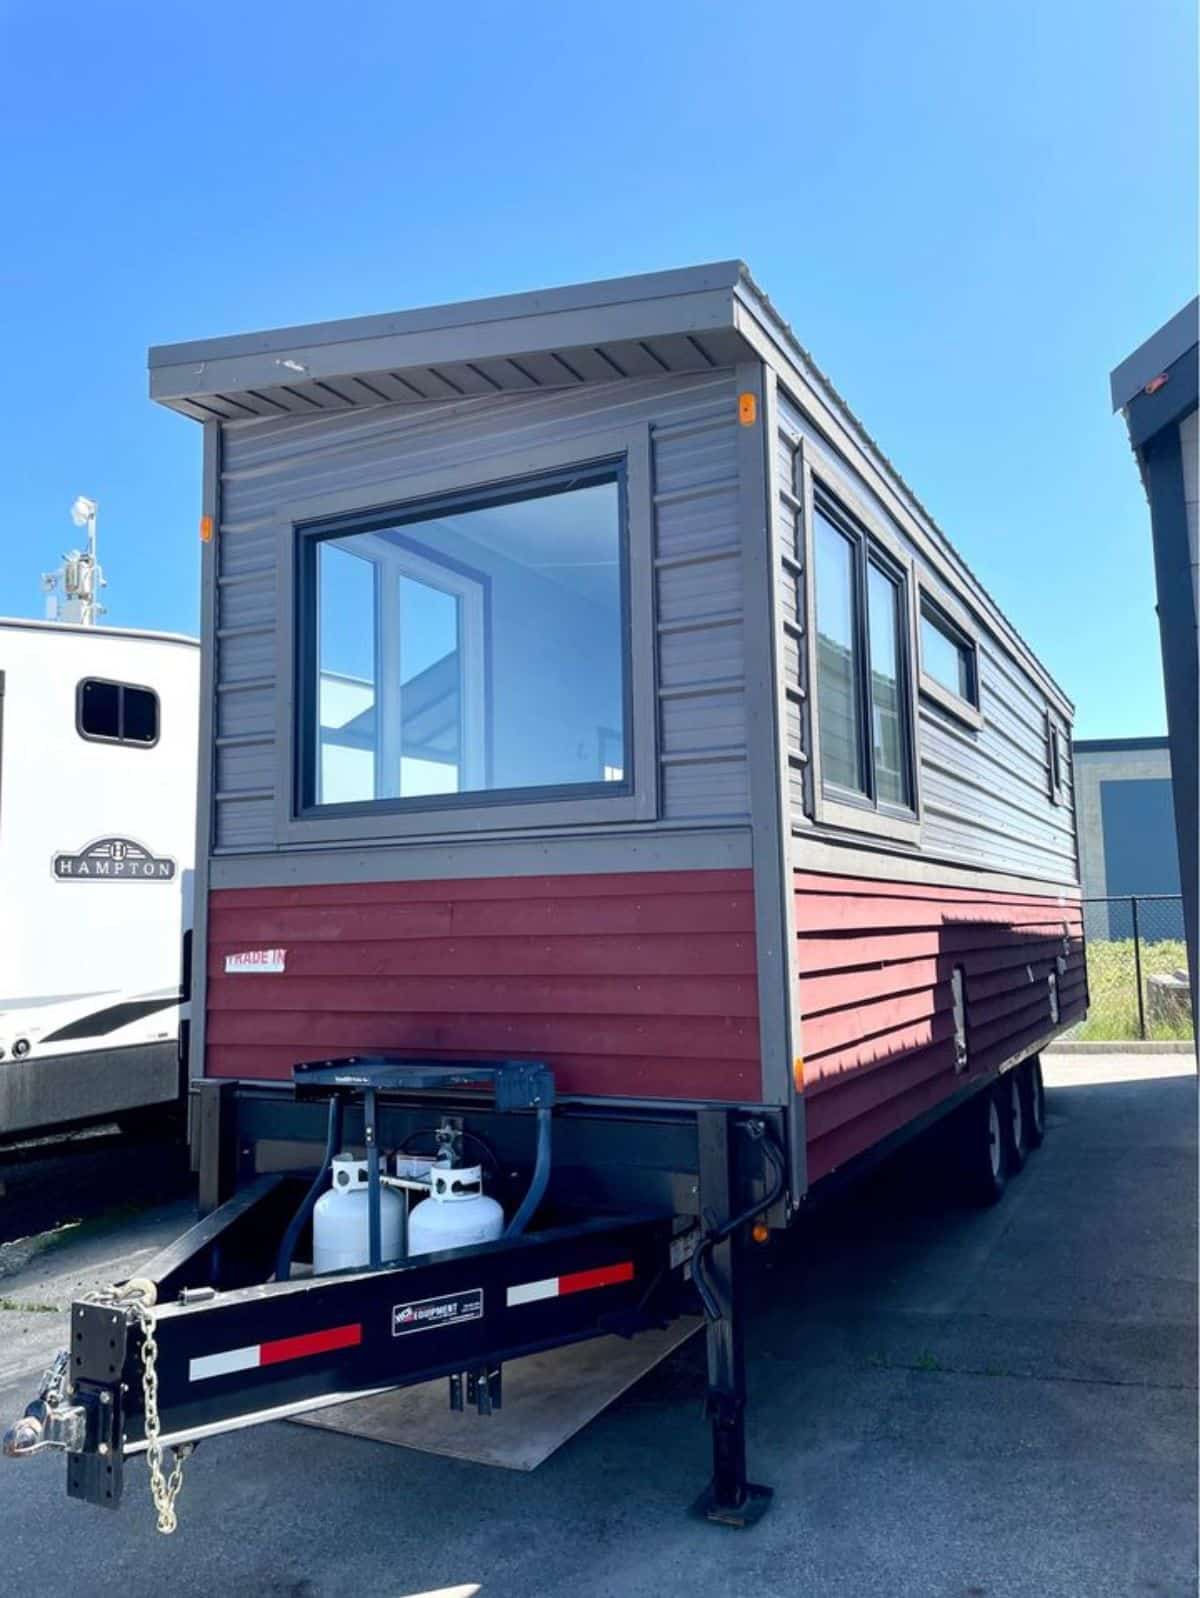 backside of tiny home in Canada